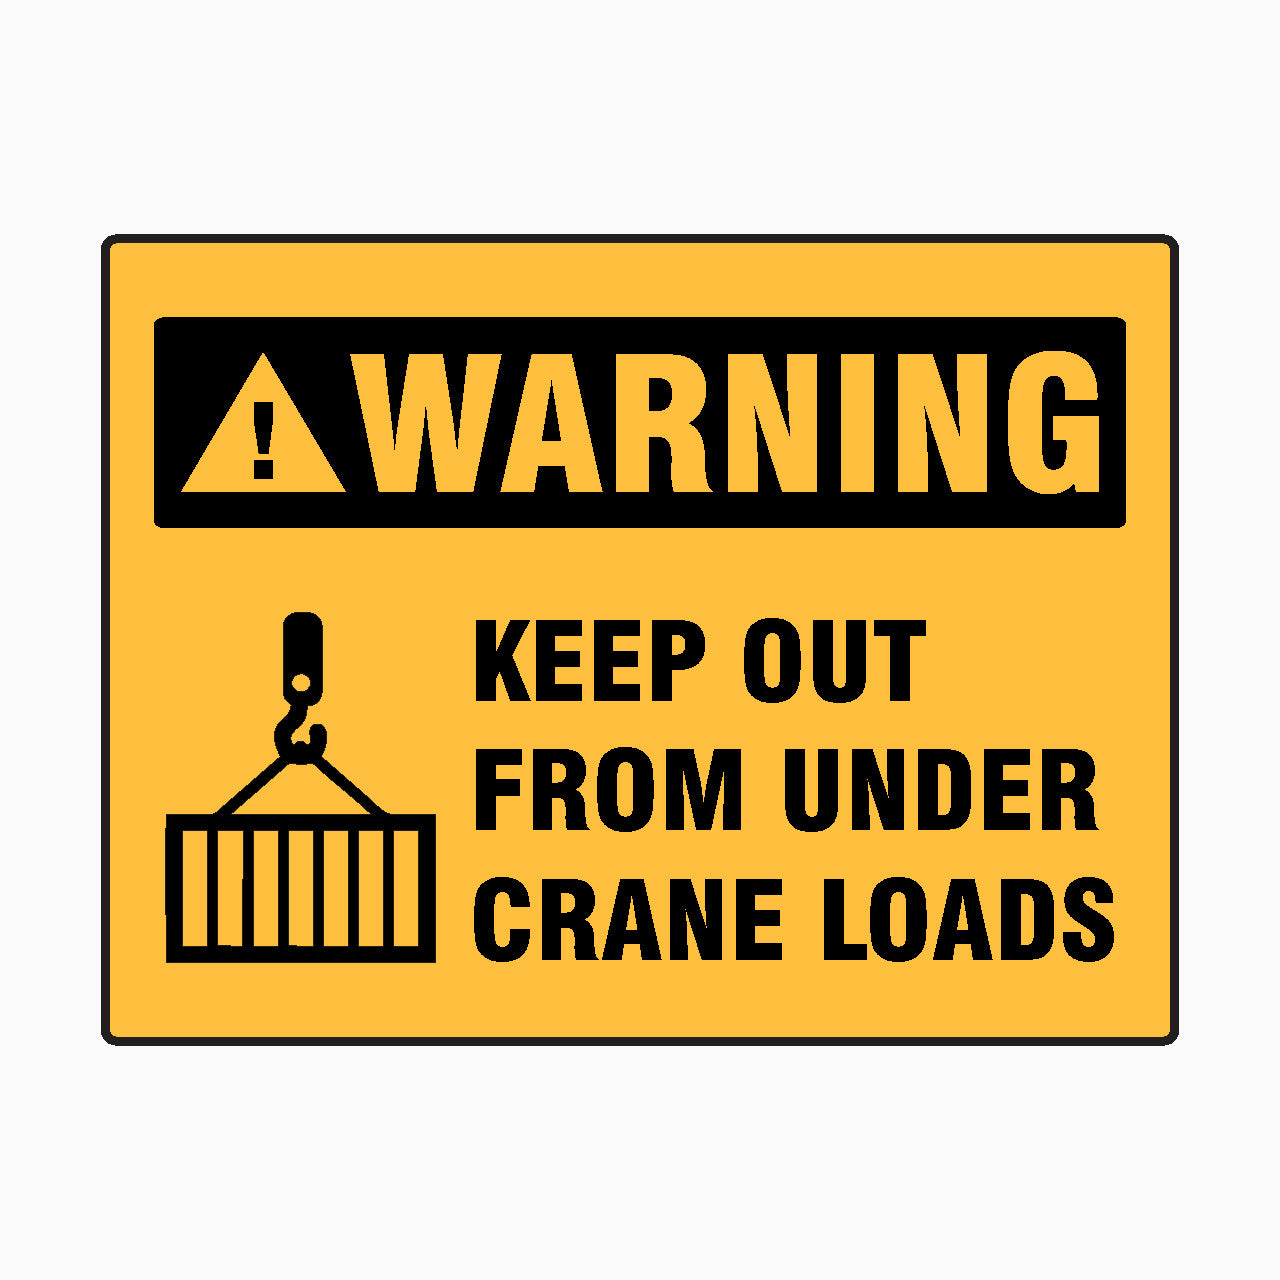 WARNING SIGN - KEEP OUT FROM UNDER CRANE LOADS SIGN